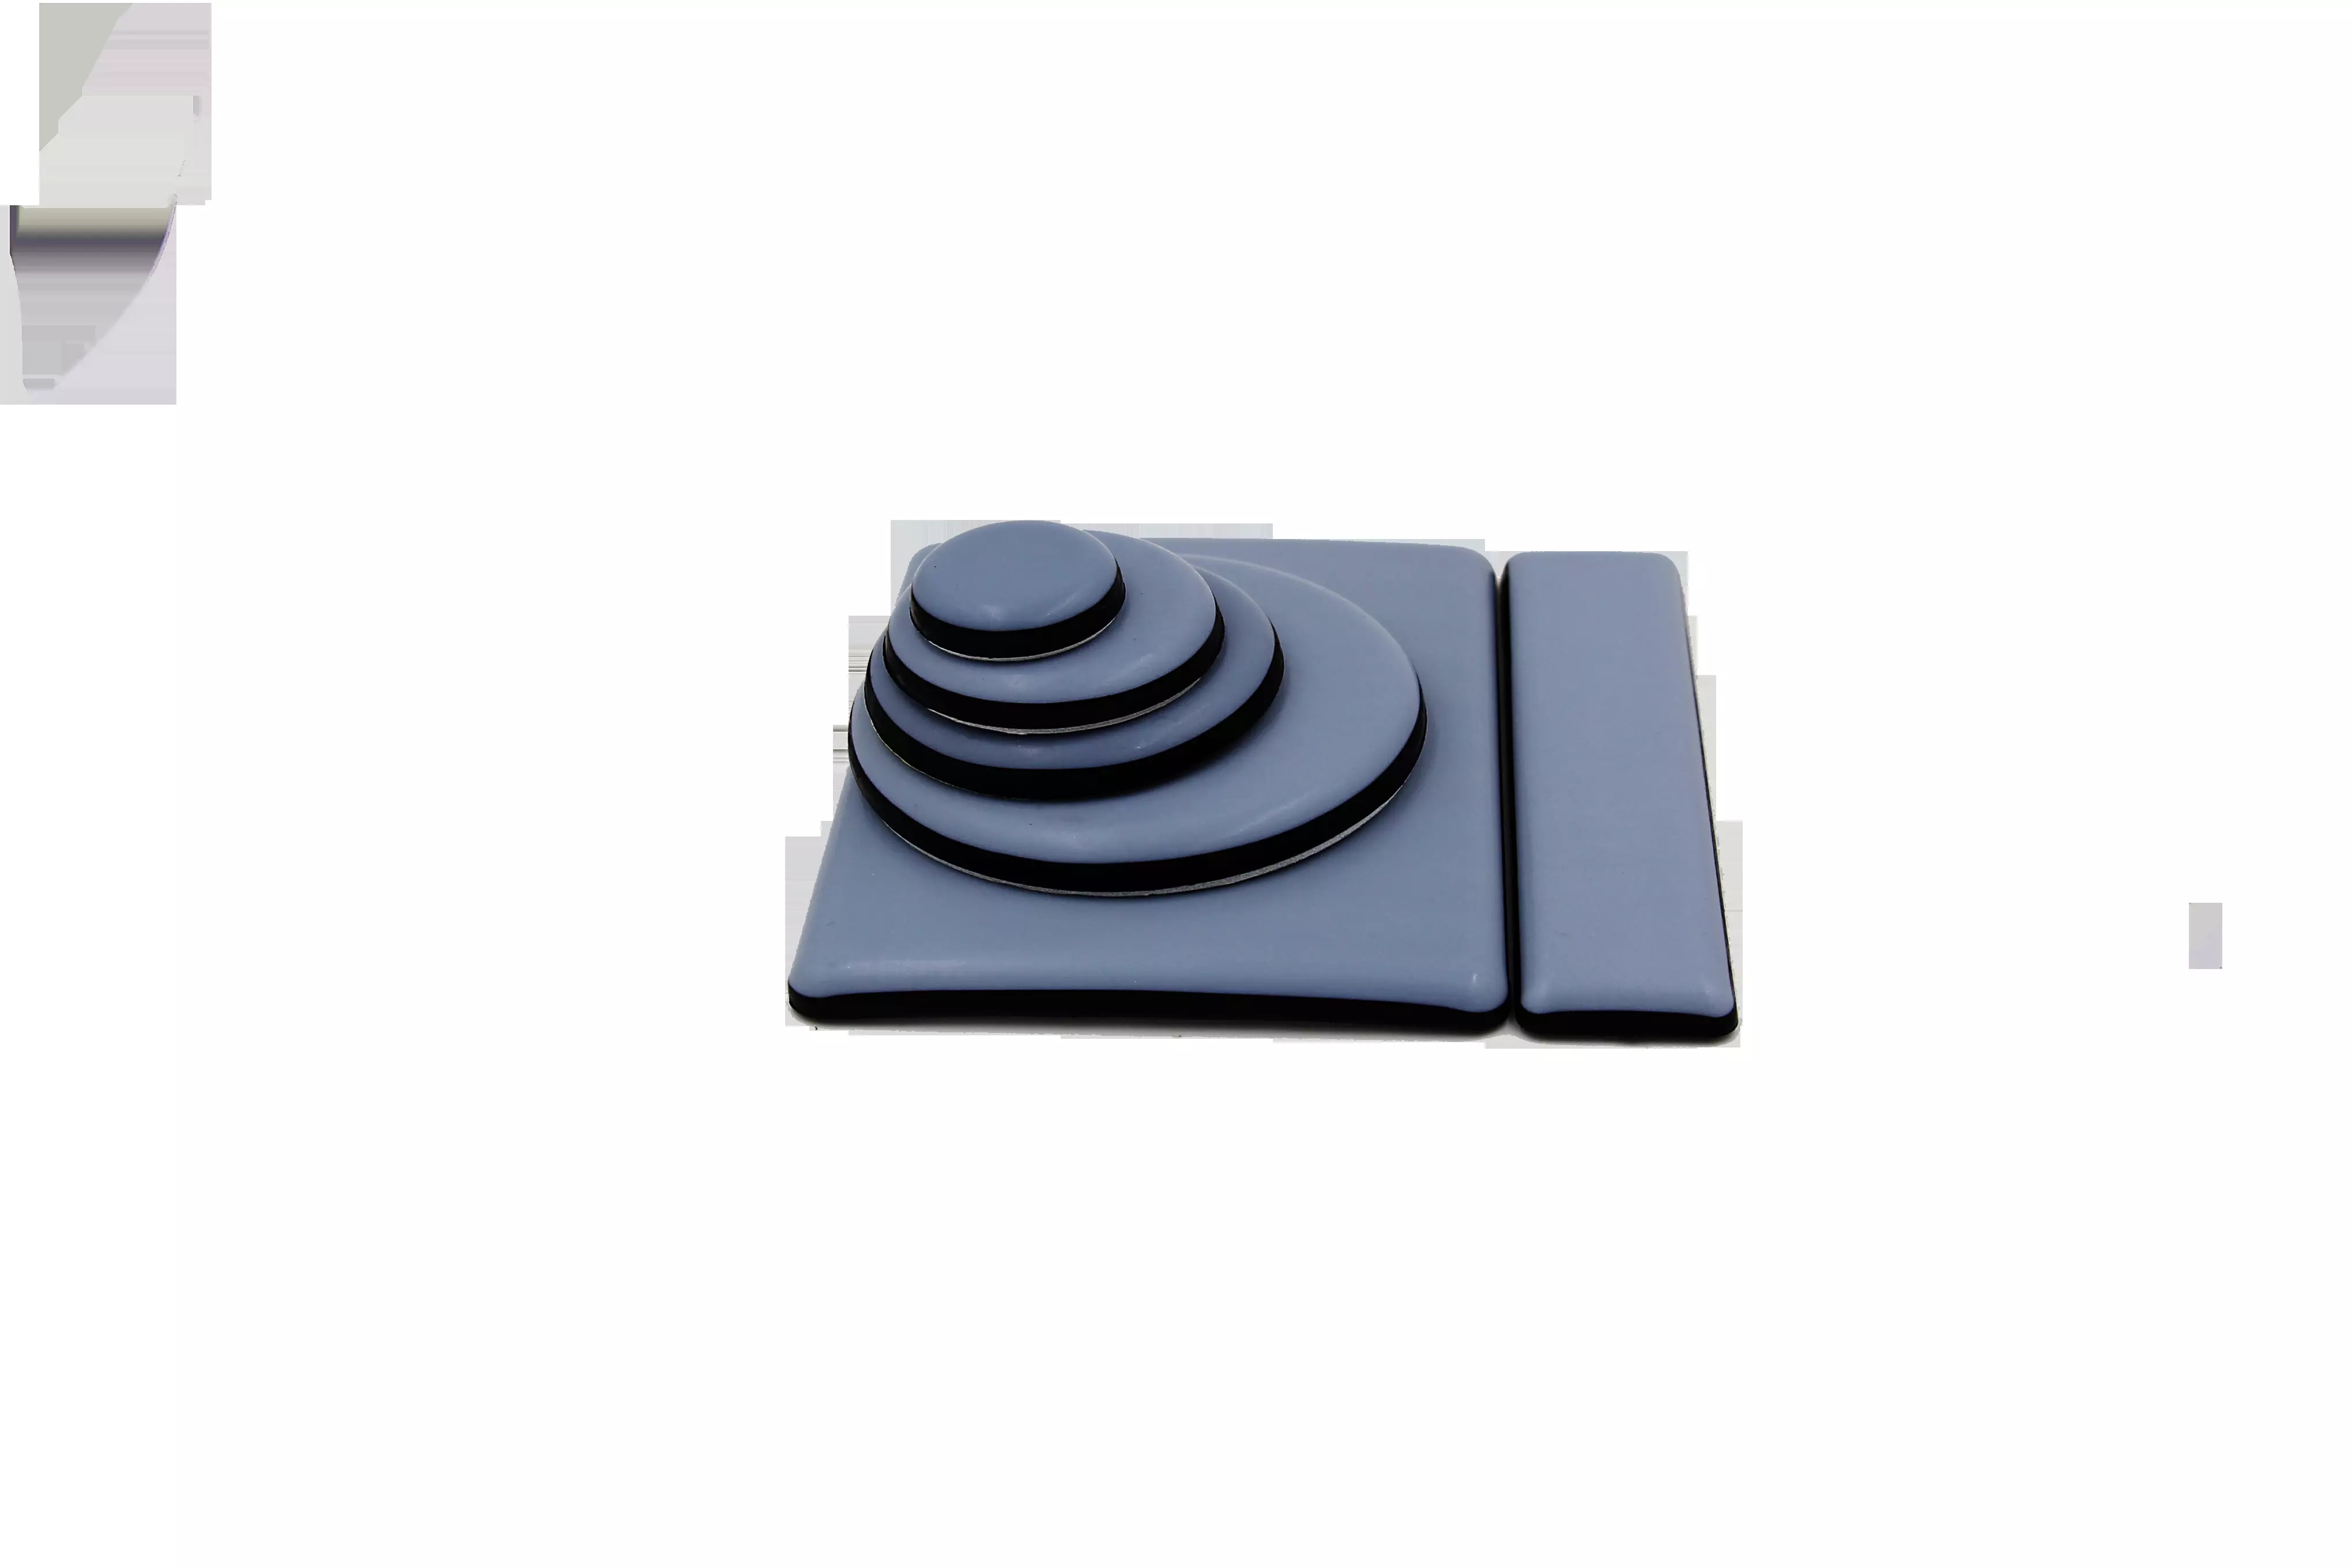 durable adhesive PTFE sliders chair glides for tile floors